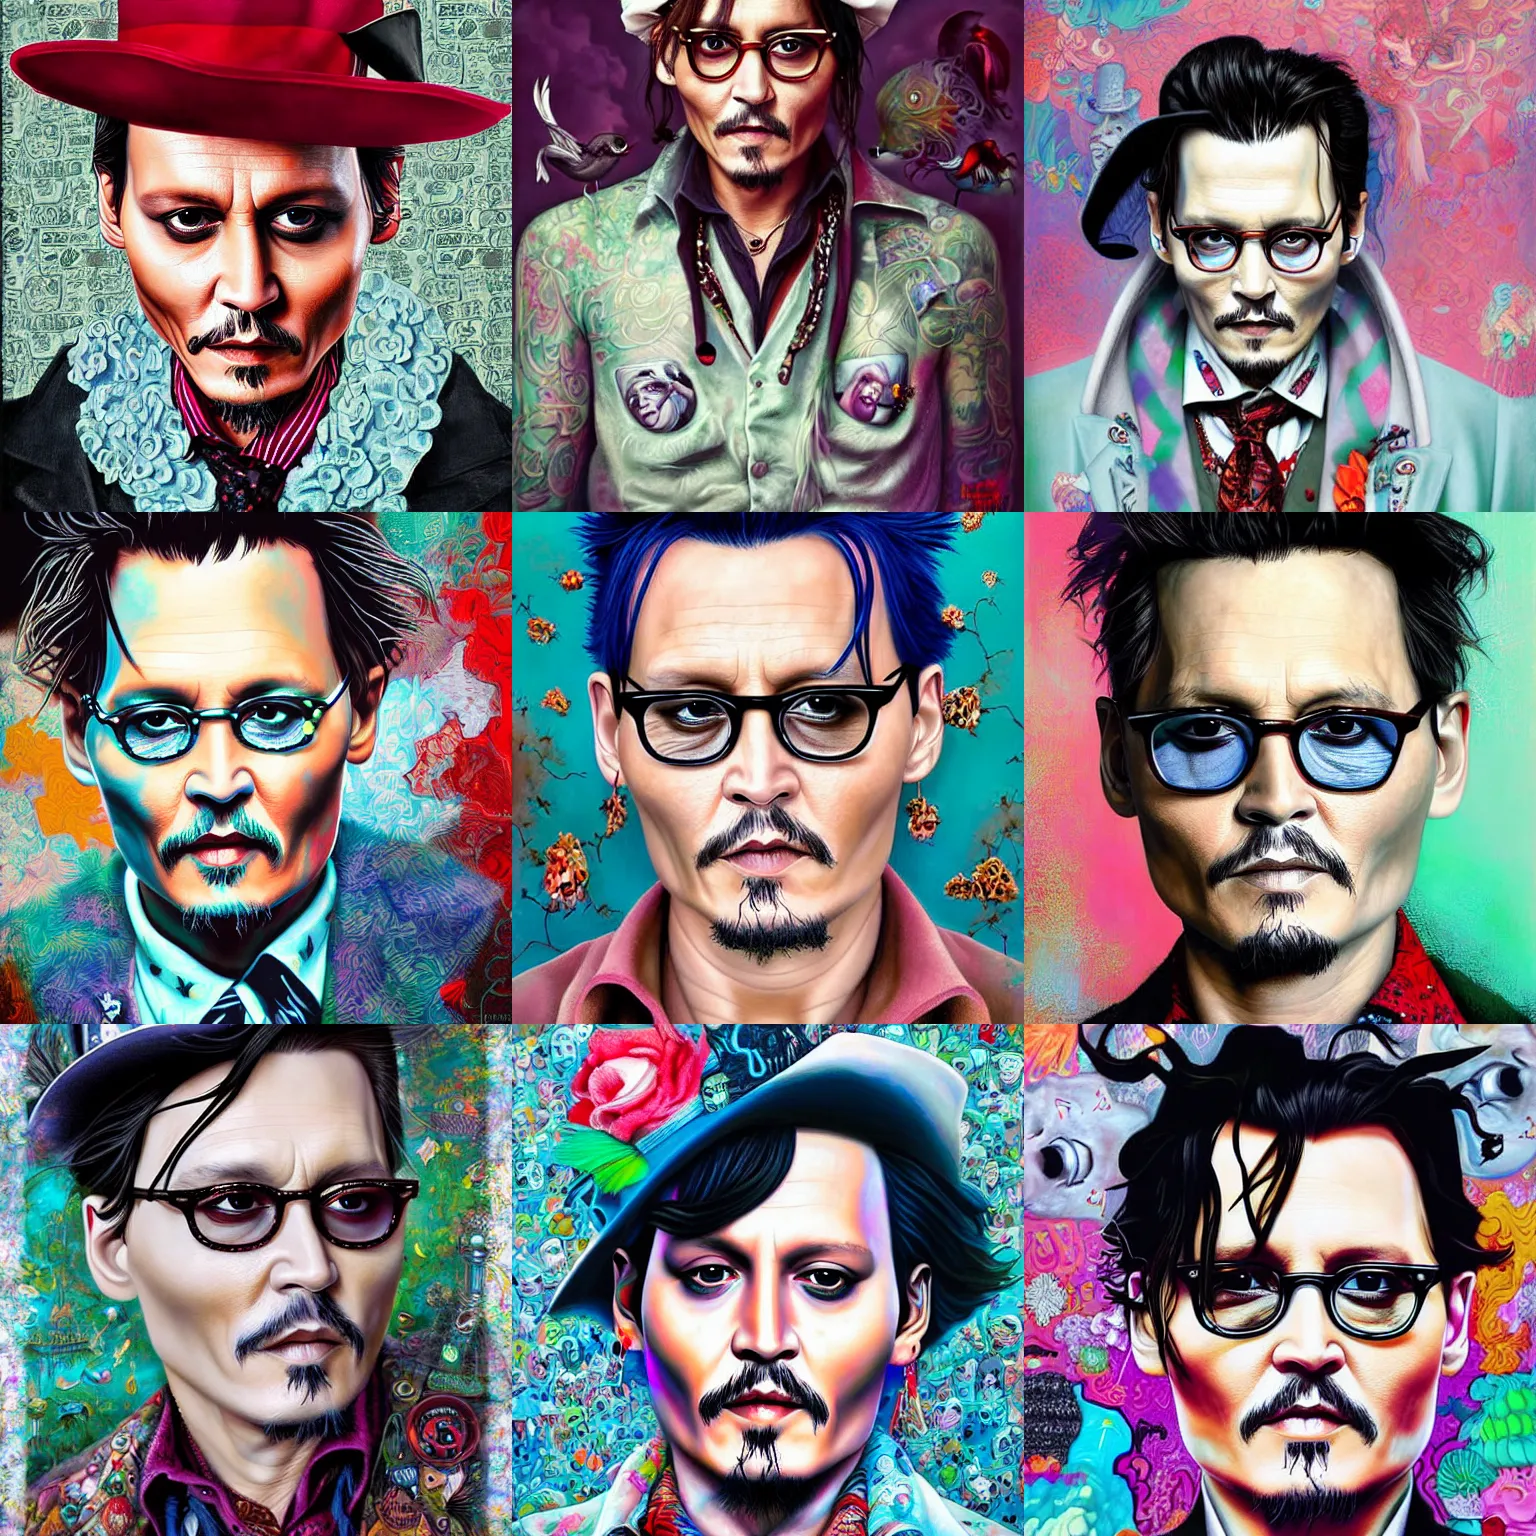 Prompt: digital painting of johnny depp by james jean, hikari shimoda, mark ryden in the style of surrealism